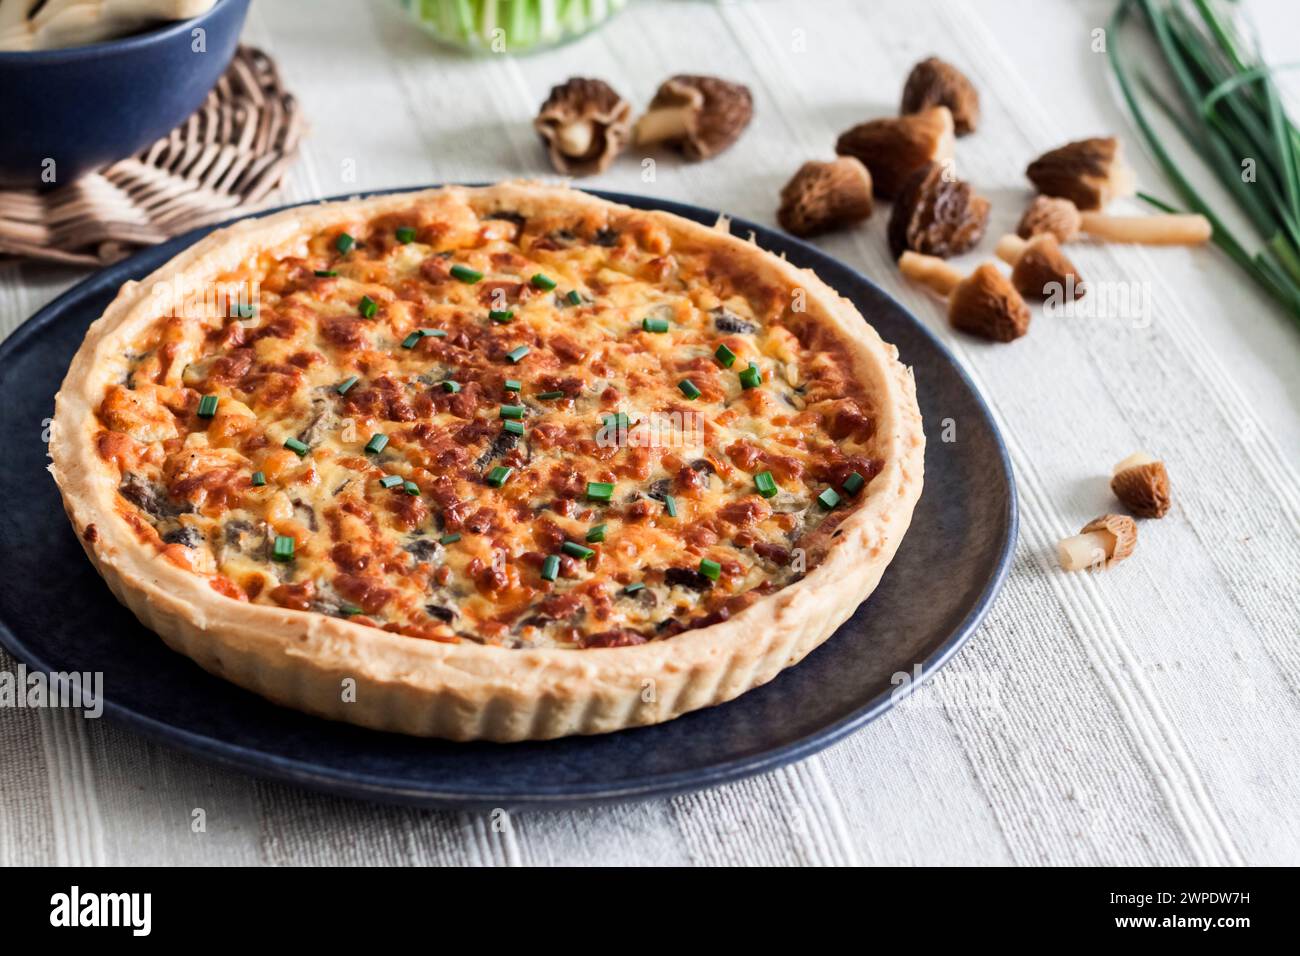 Quiche - open tart pie with morel mushrooms, onion and cheese on a plate Stock Photo